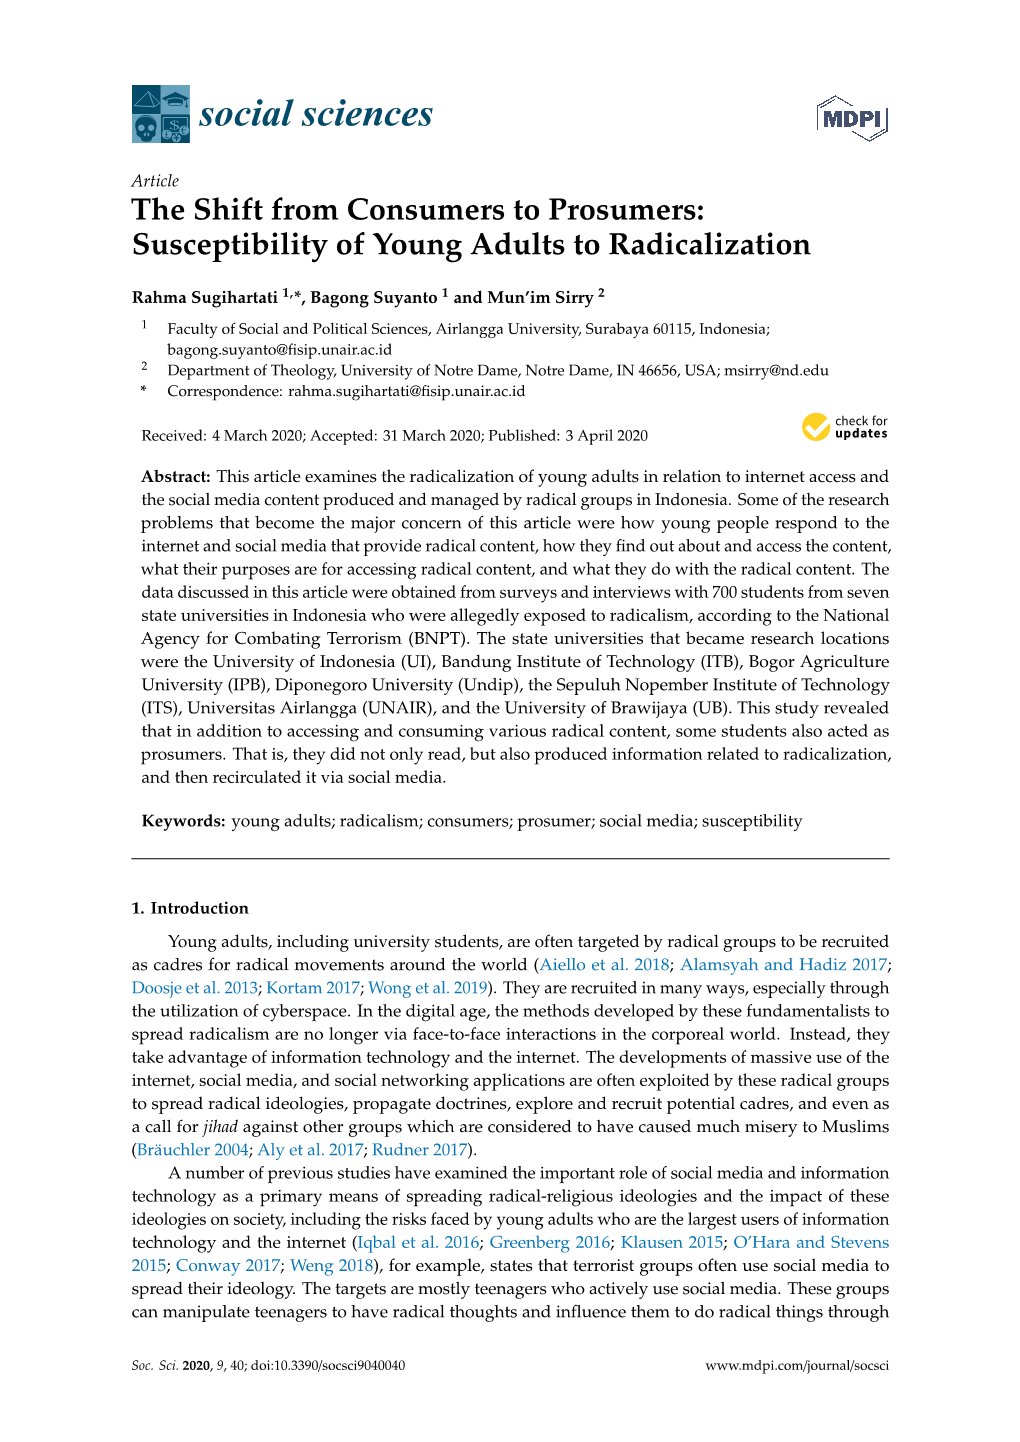 Susceptibility of Young Adults to Radicalization